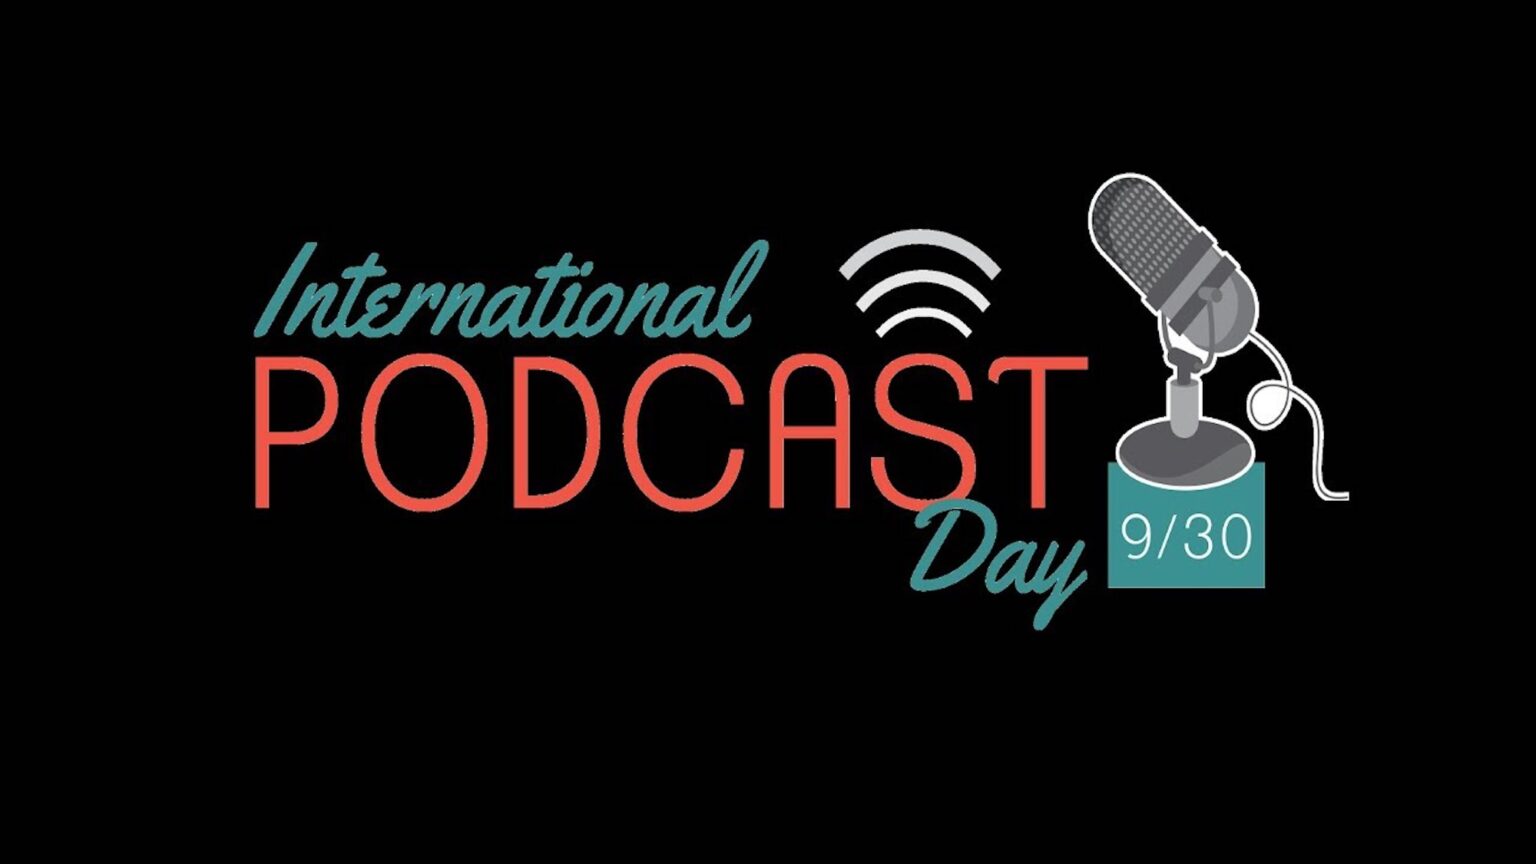 It's International Podcast Day! Go through Twitter recommendations to see what podcasts are so good that you can't skip them.